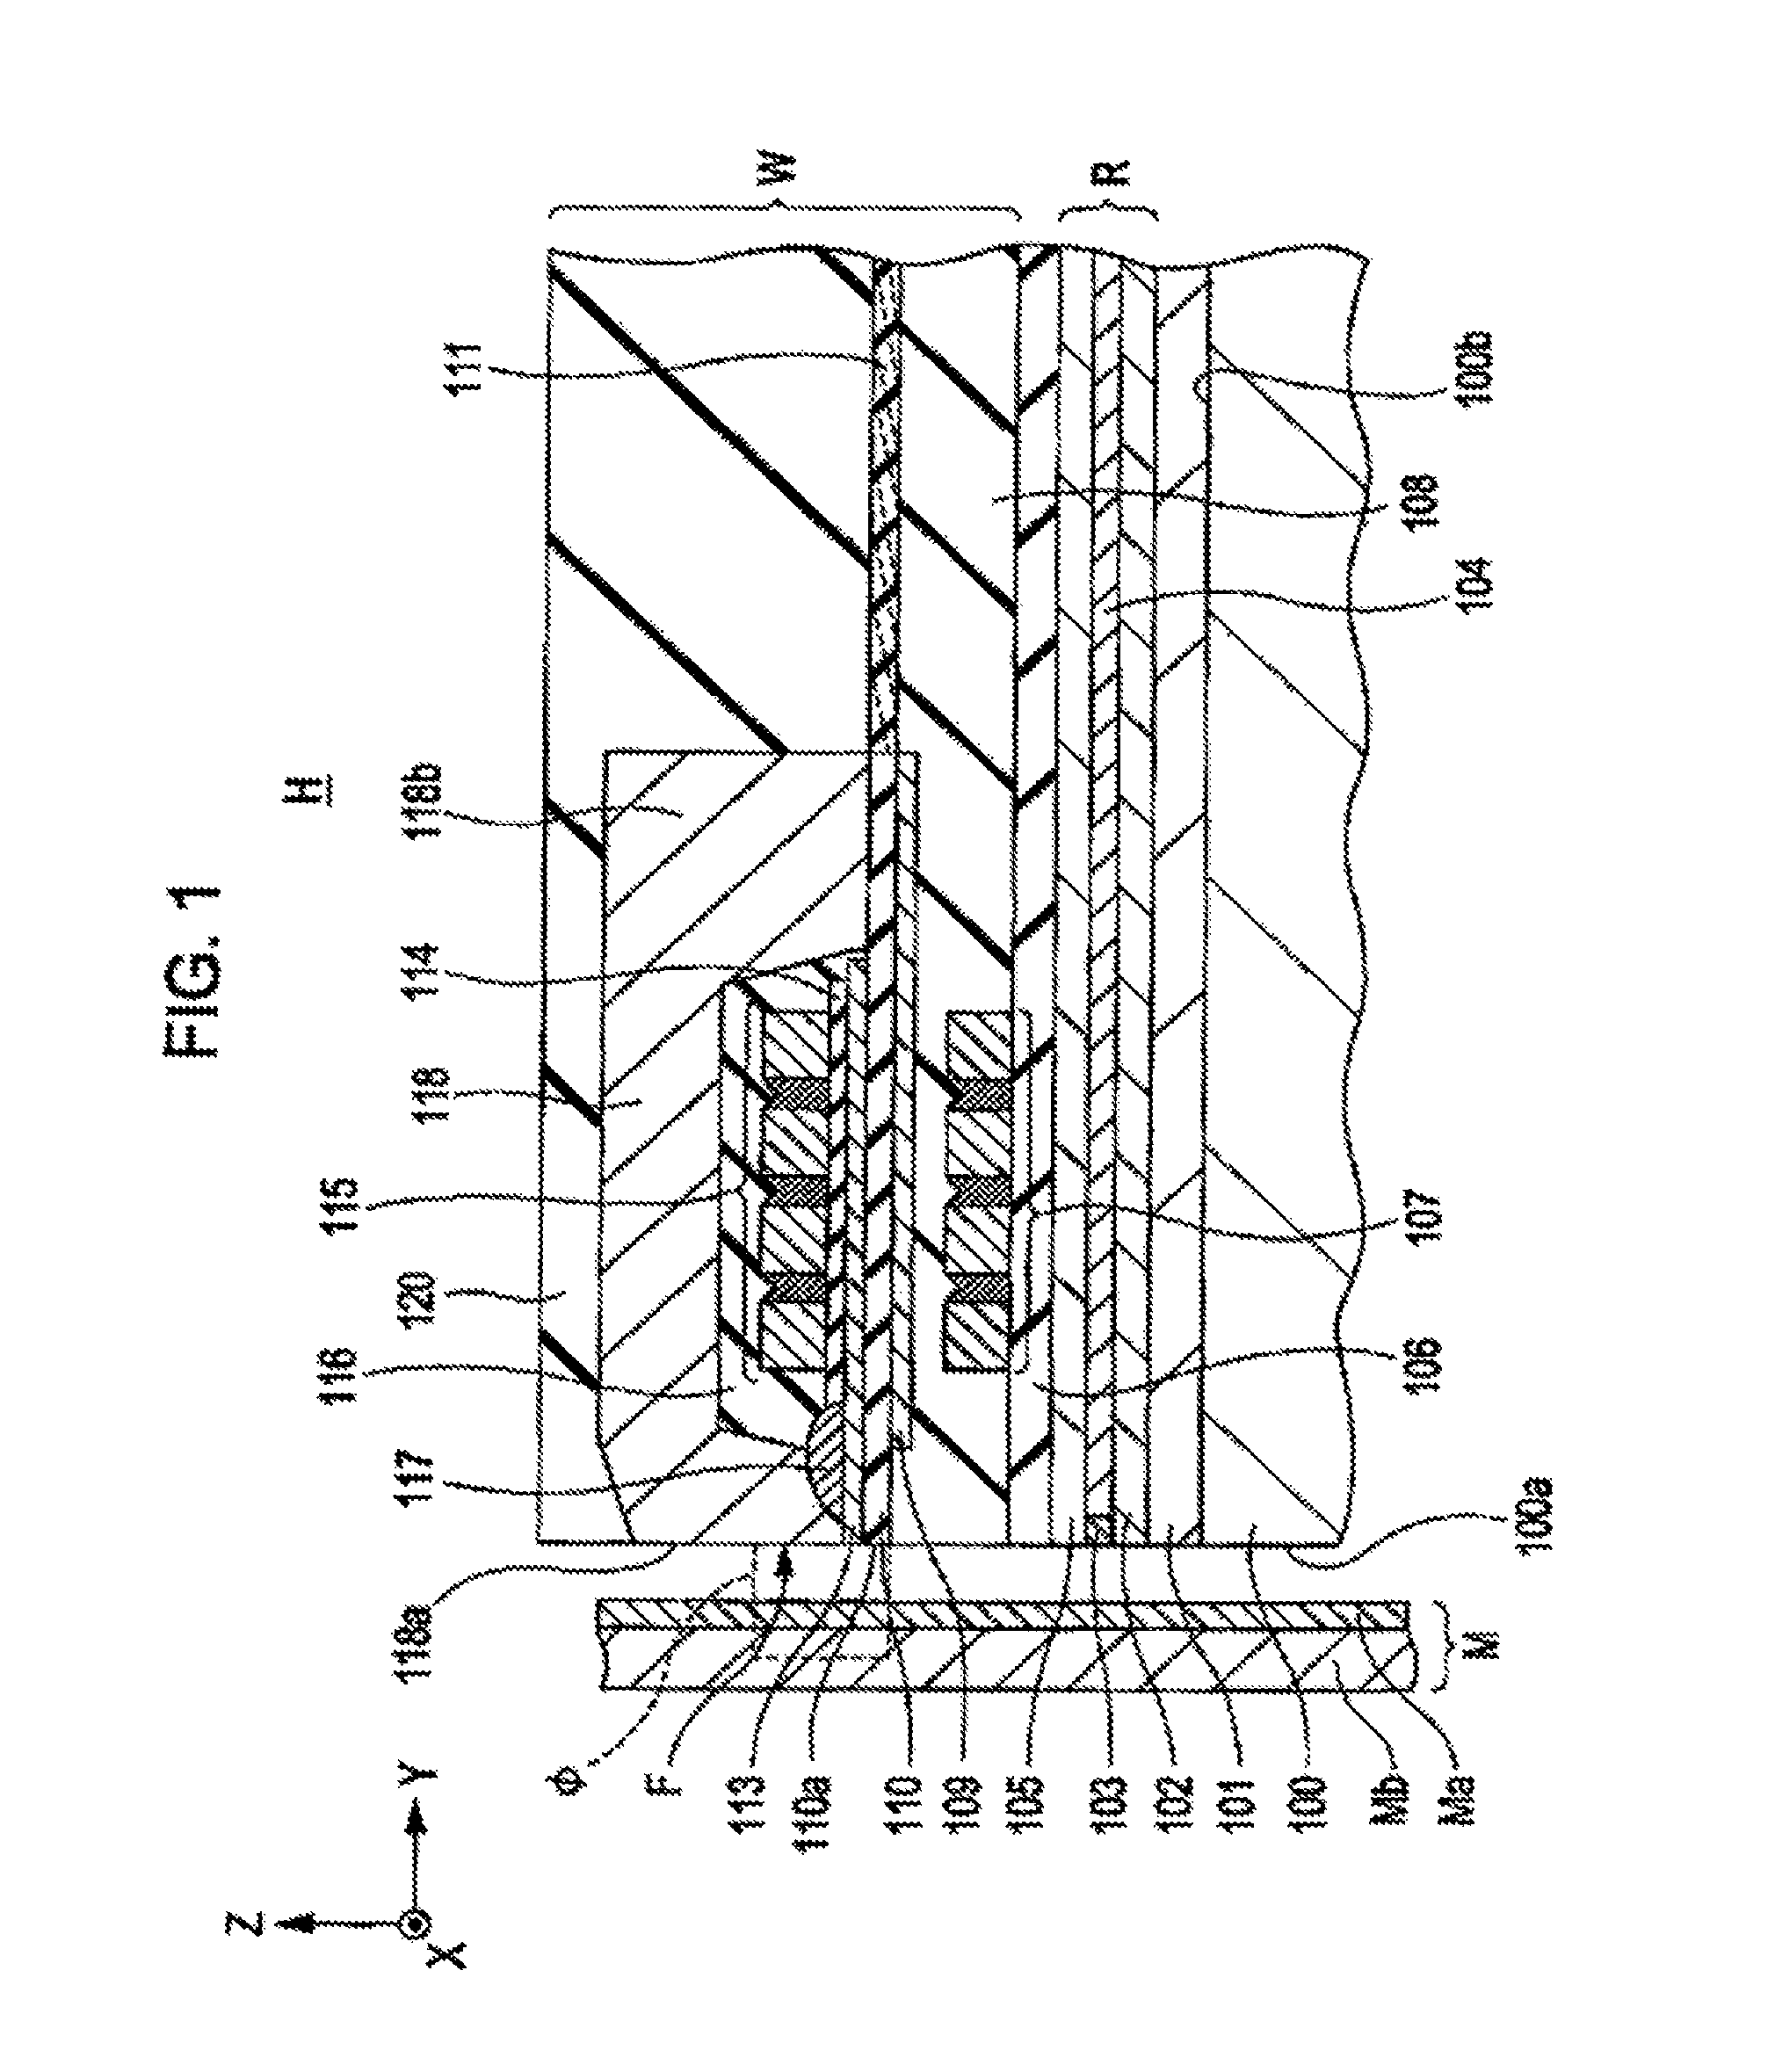 Perpendicular magnetic recording head having a main magnetic pole layer with a trapezoidally shaped flared part with a ratio of the length of the long base to that of the short base is equal to 1